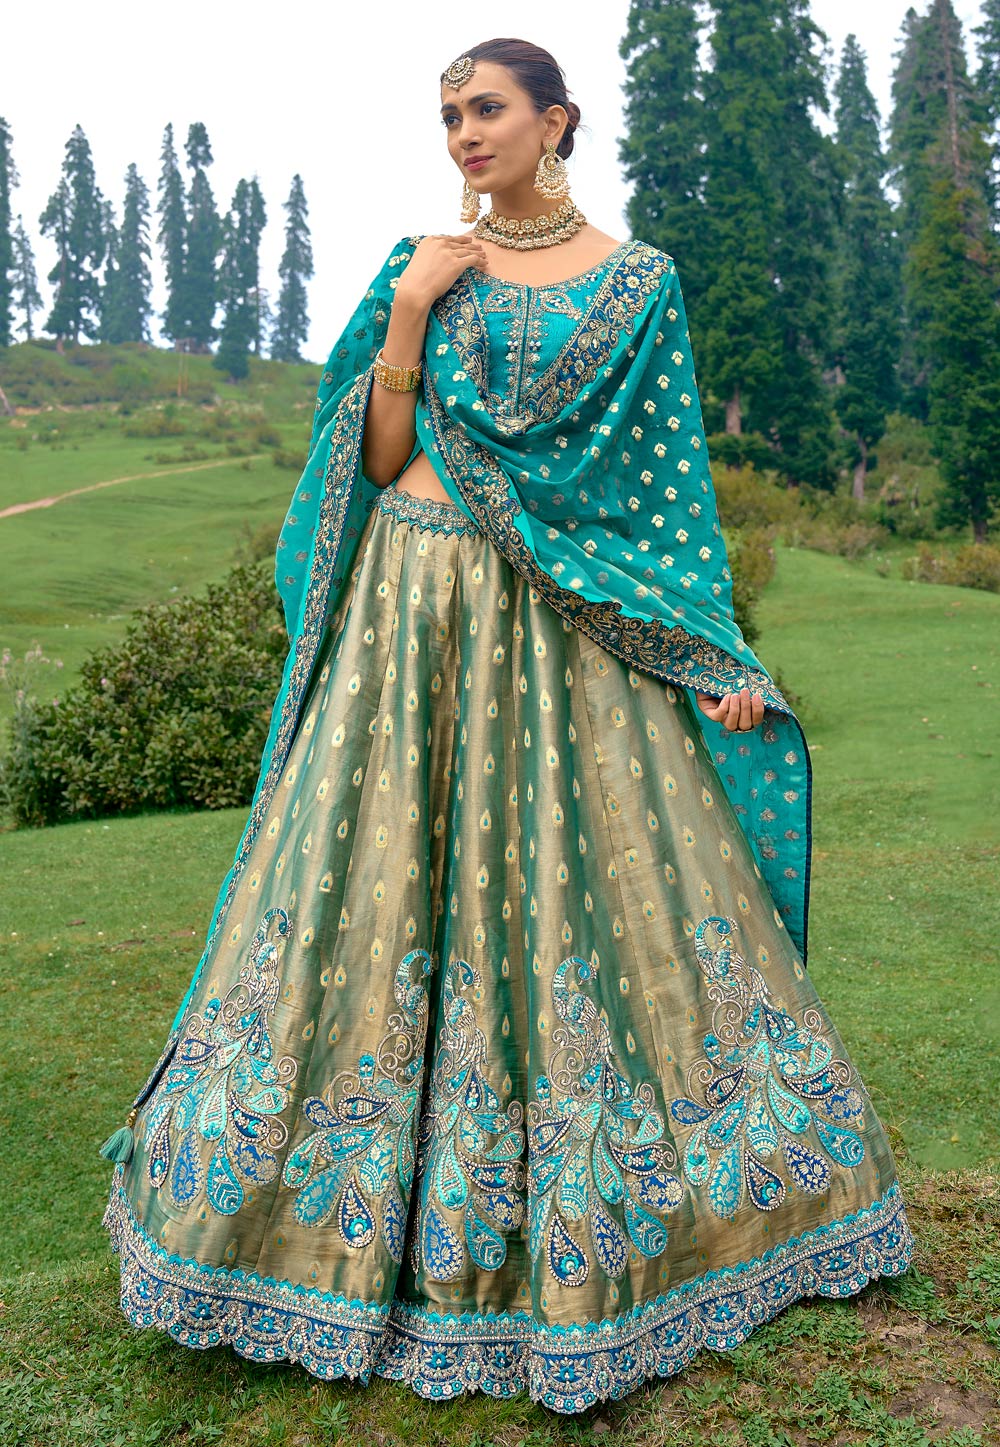 turquoise and gold lengha - Google Search